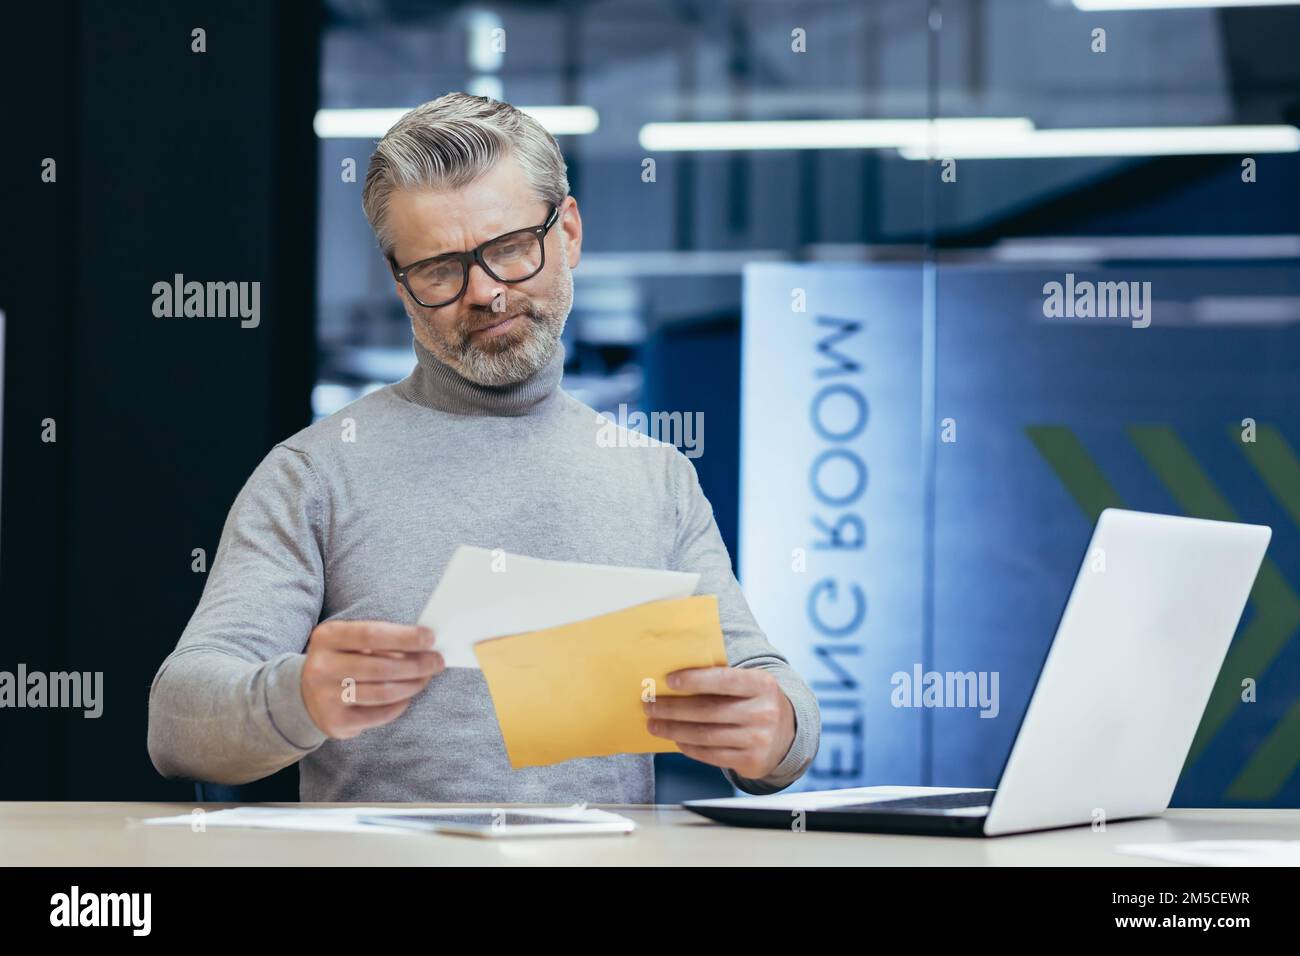 Mature gray-haired businessman inside modern office received letter message, senior man upset opens postal envelope, boss reads bad news upset and sad working at desk with laptop. Stock Photo